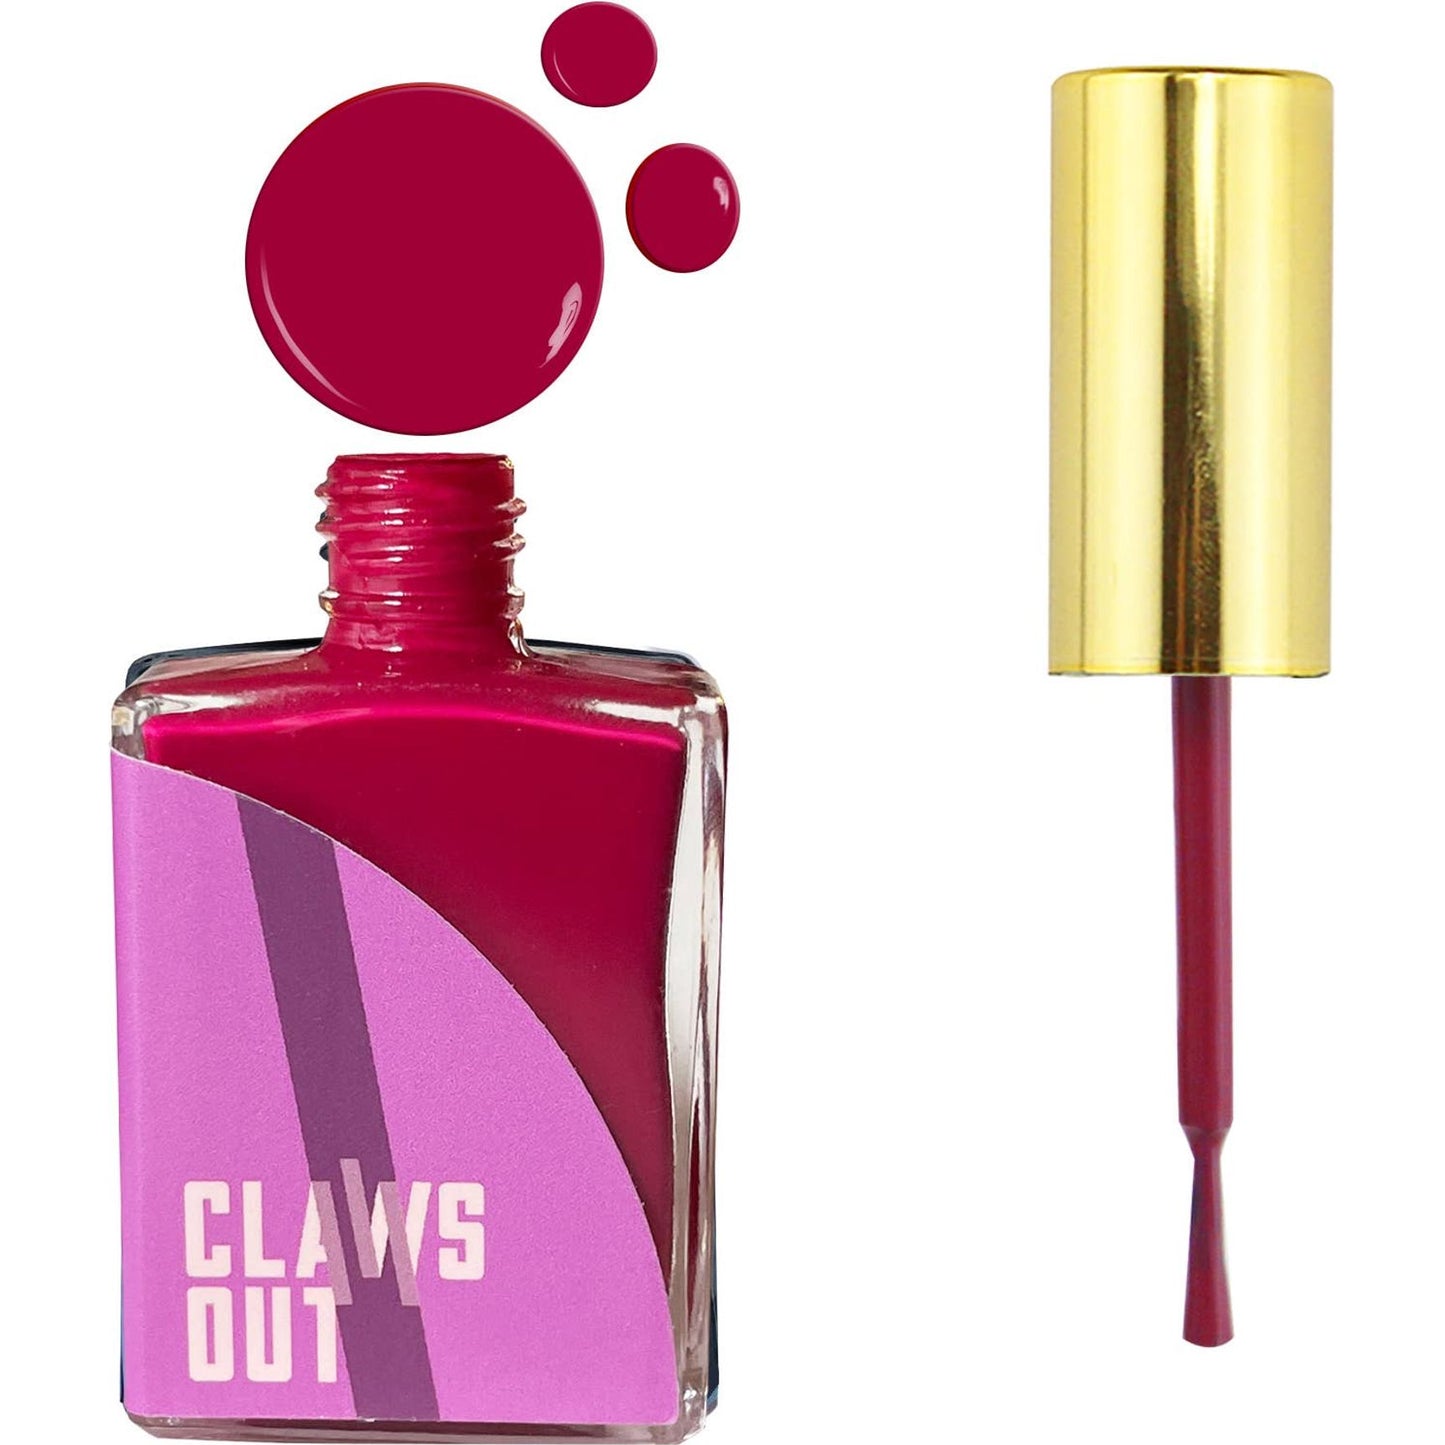 Claws out - F Cancer Nail Polish